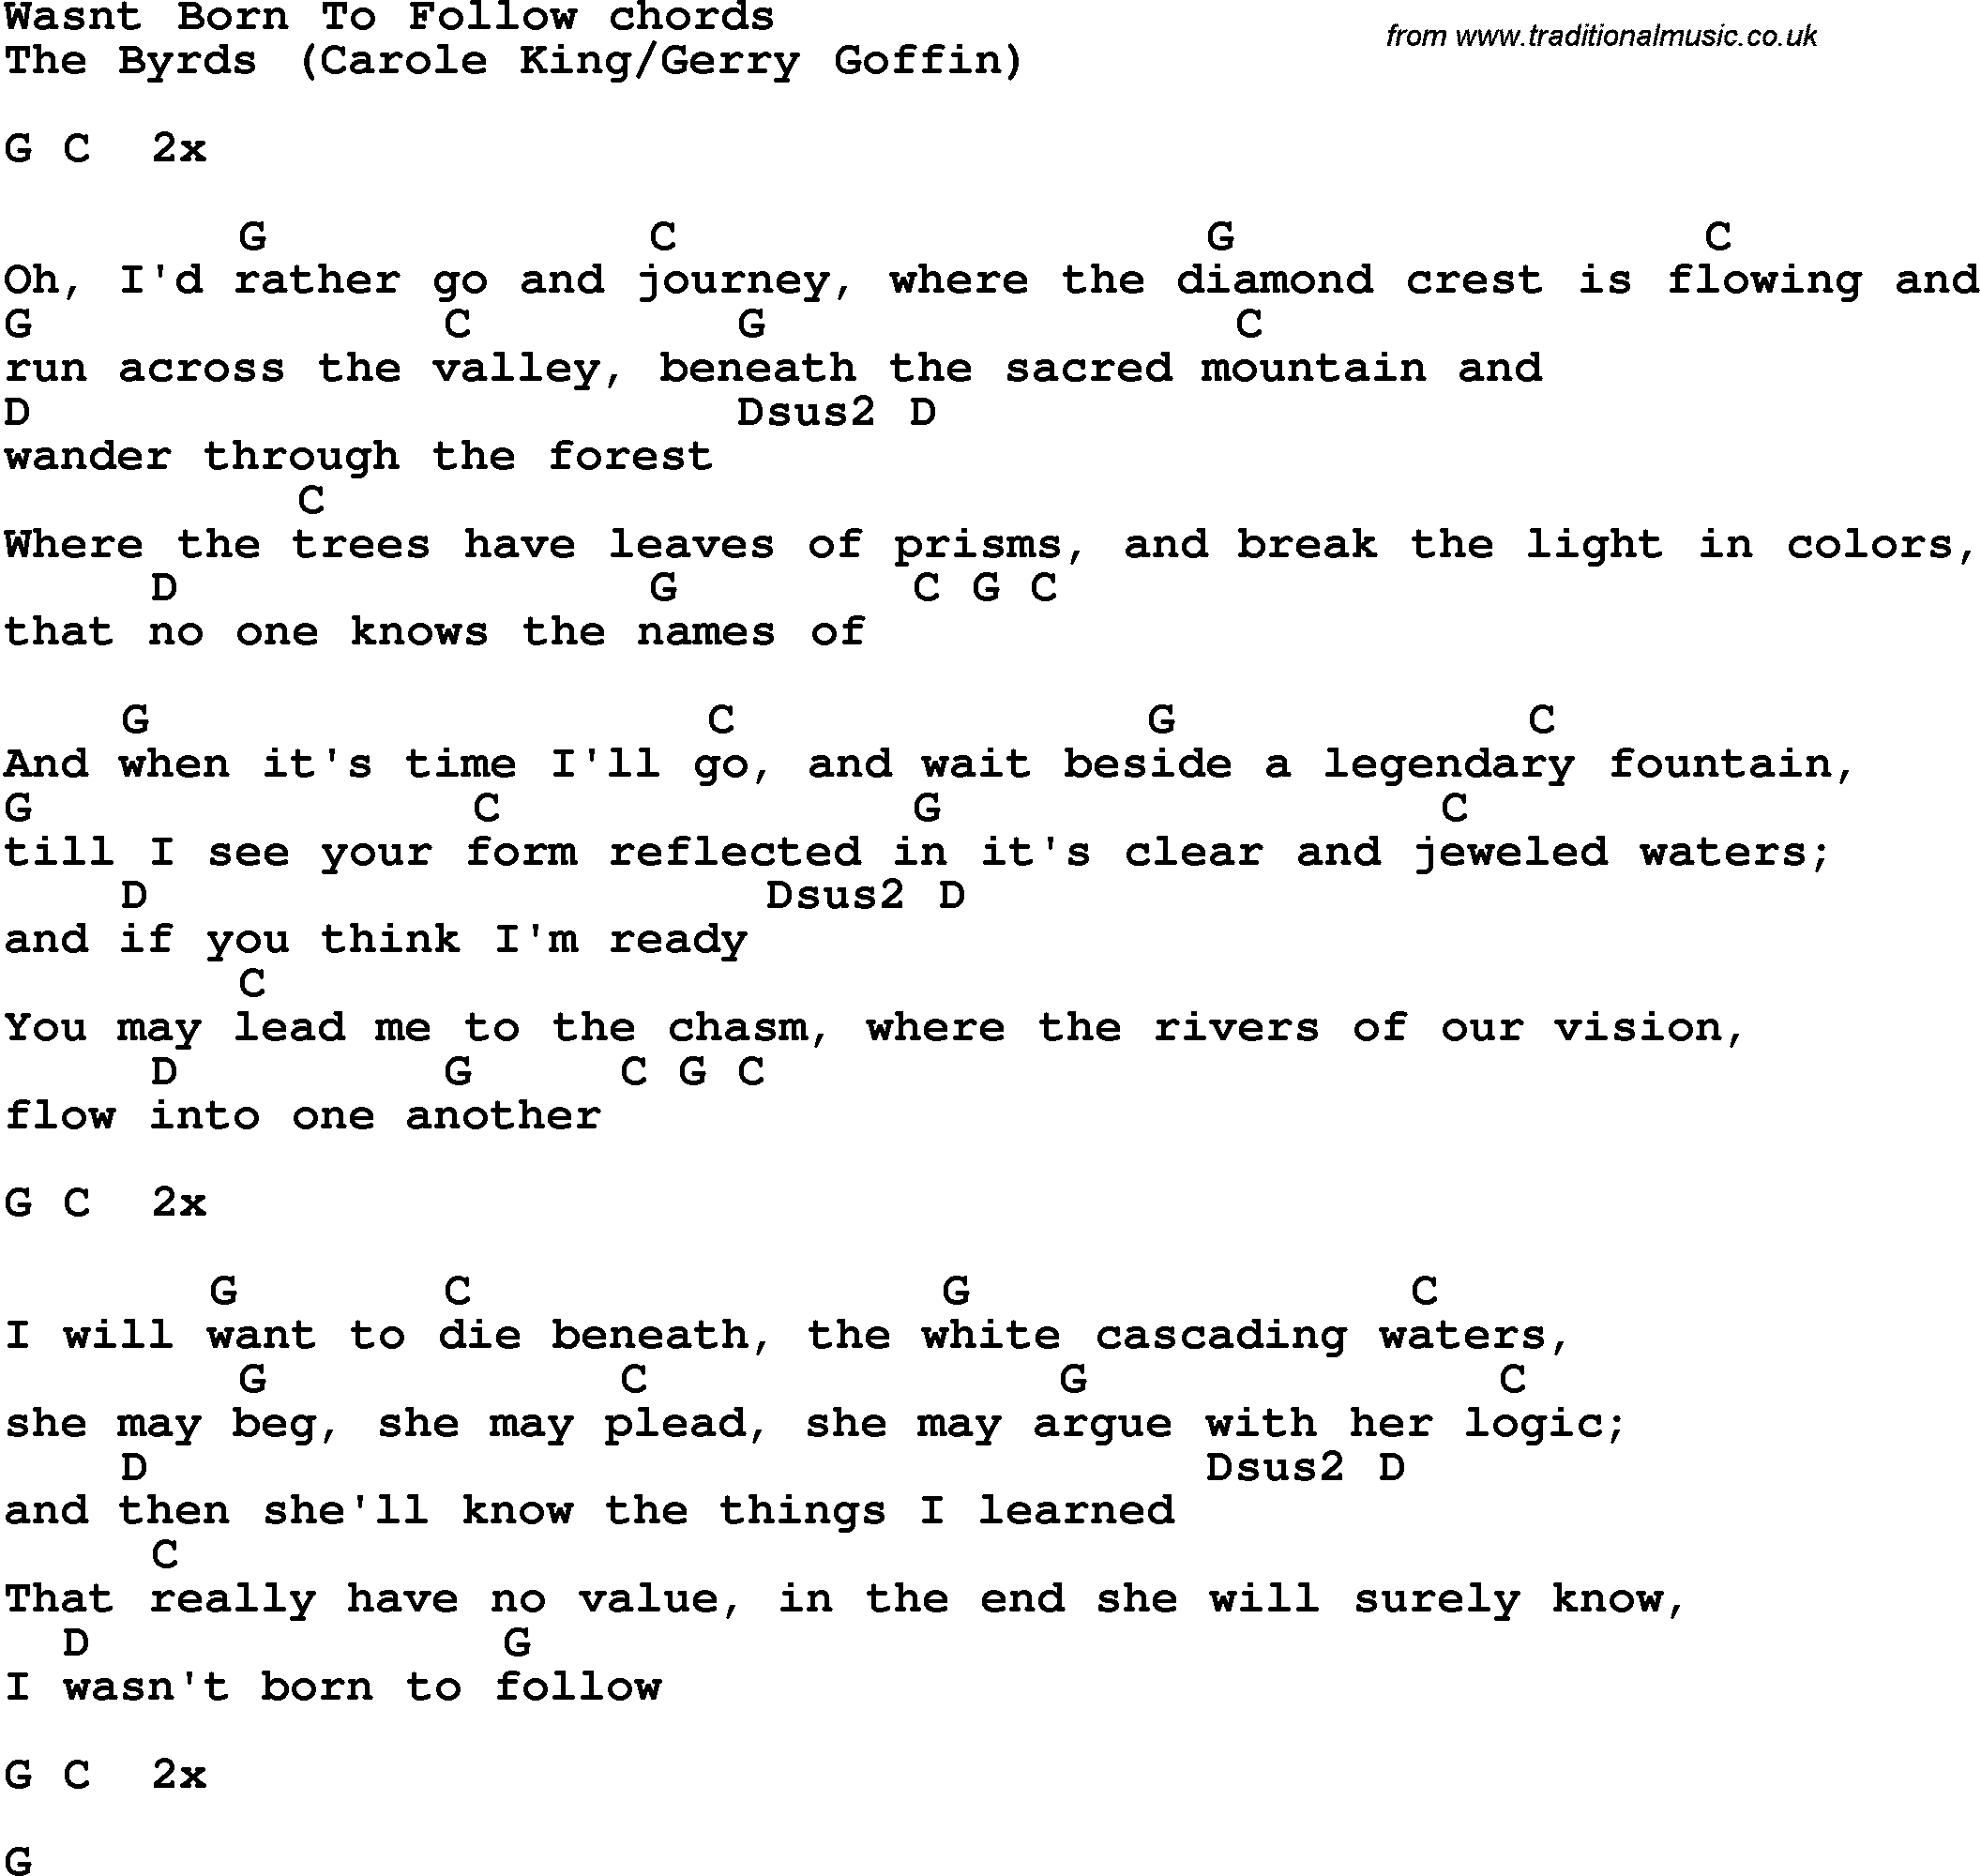 Song Lyrics with guitar chords for Wasn't Born To Follow